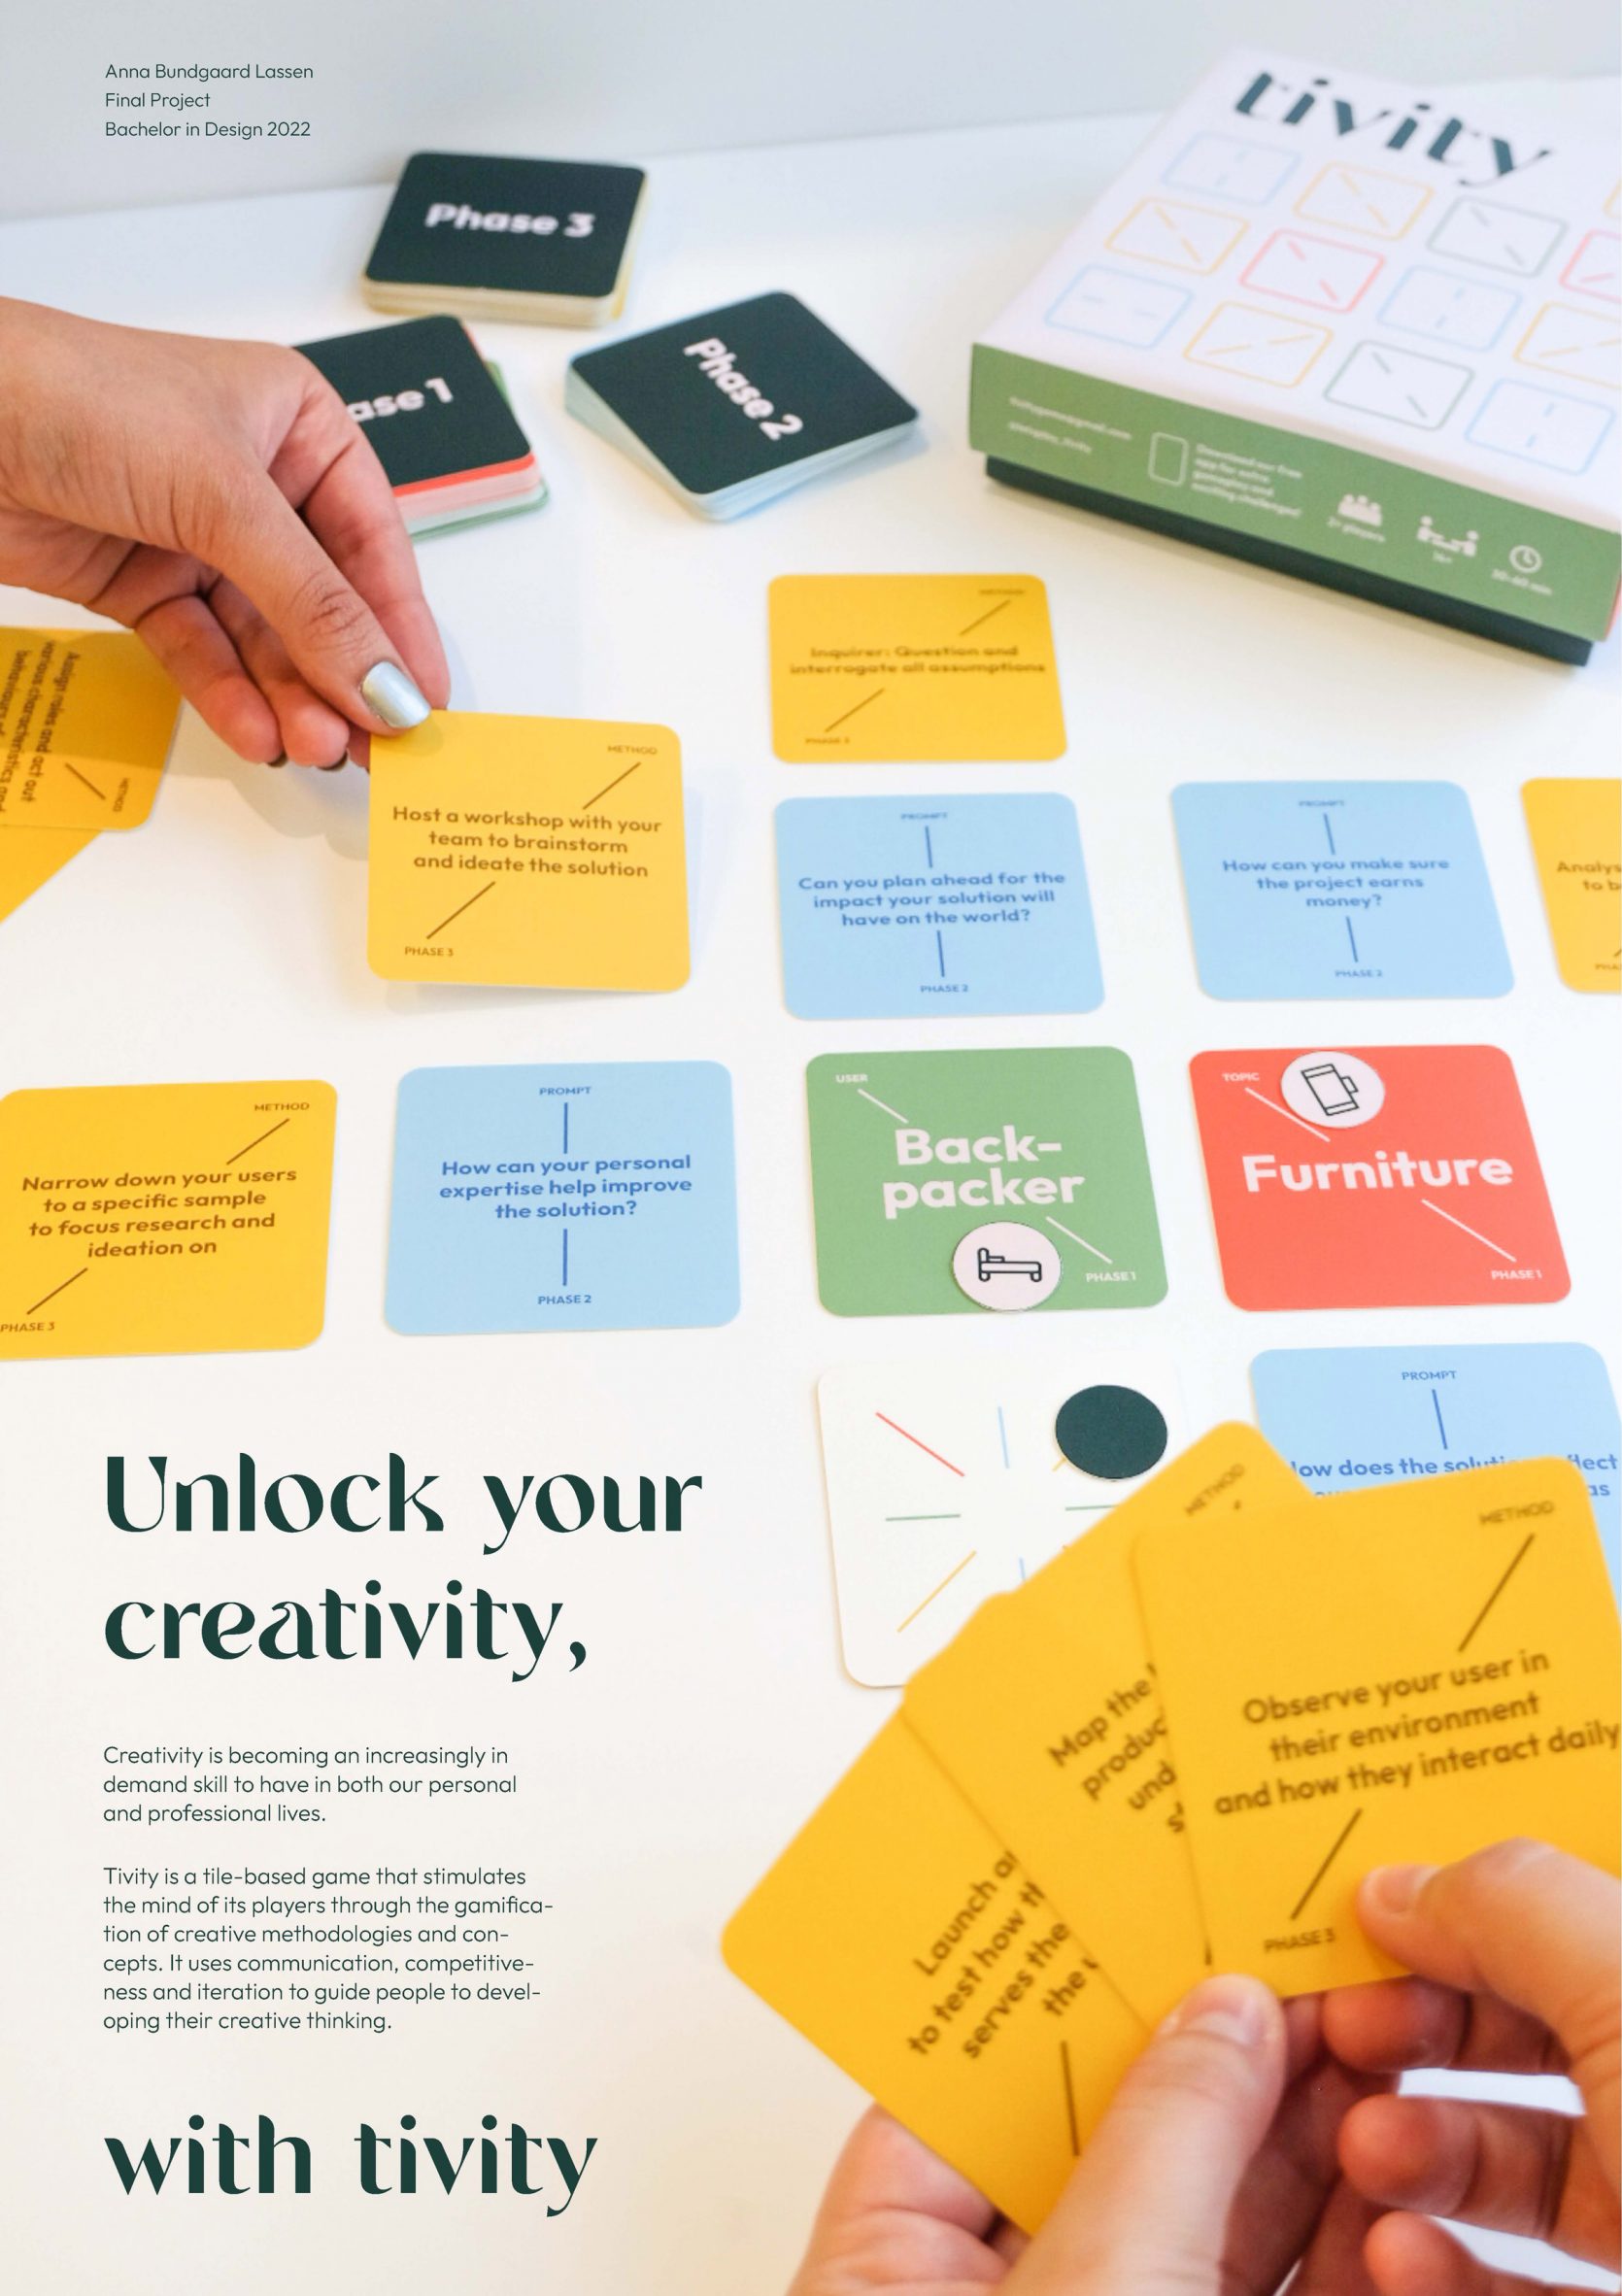 Colourful cards from a student-designed card game encouraging creativity